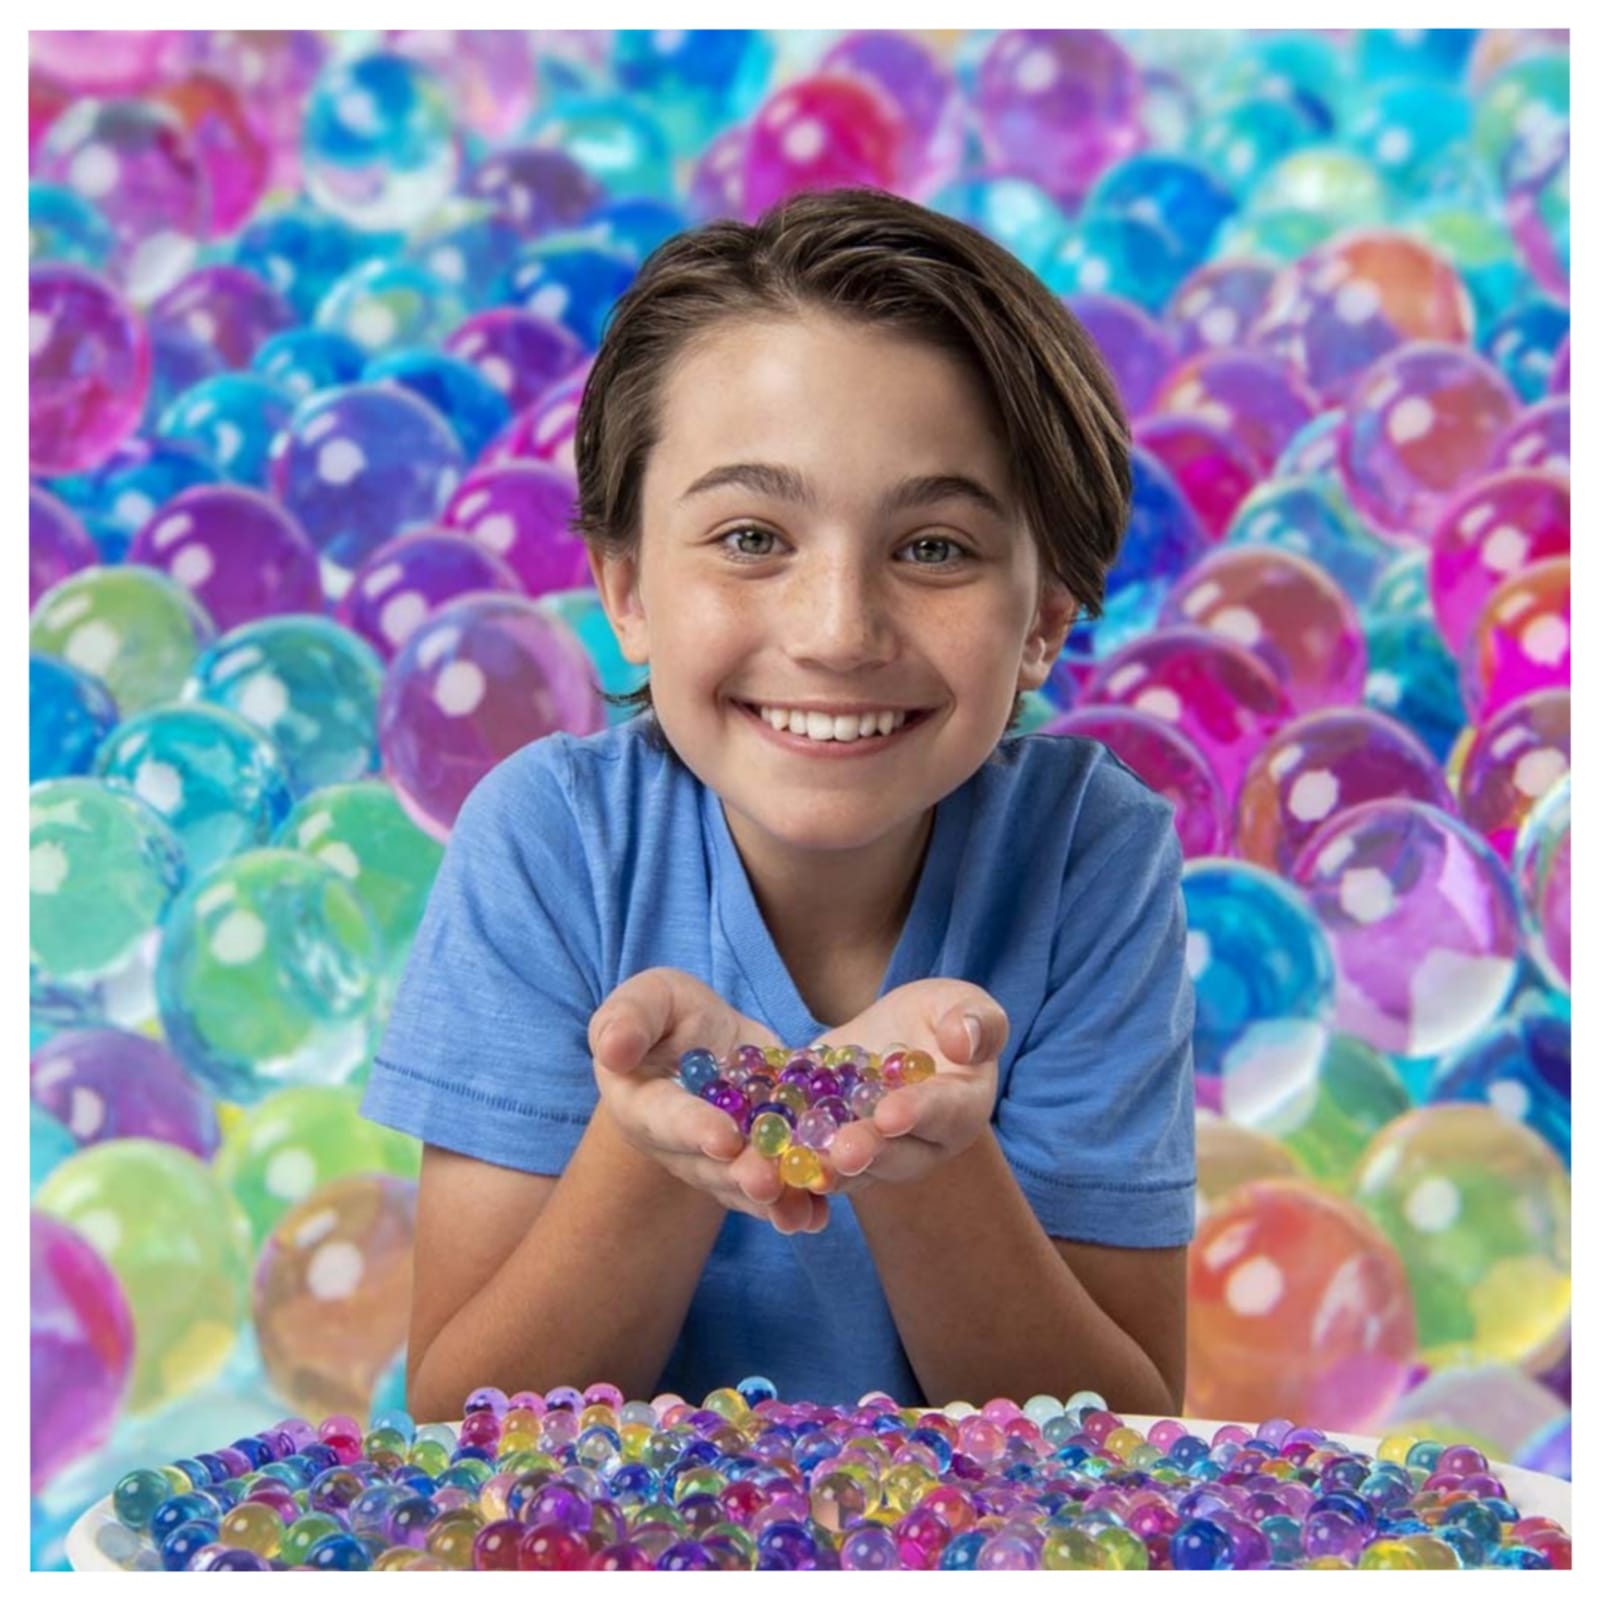 Orbeez - Grown Mega Pack 2000 Squishy Beads - 6061610 - Toys 4You